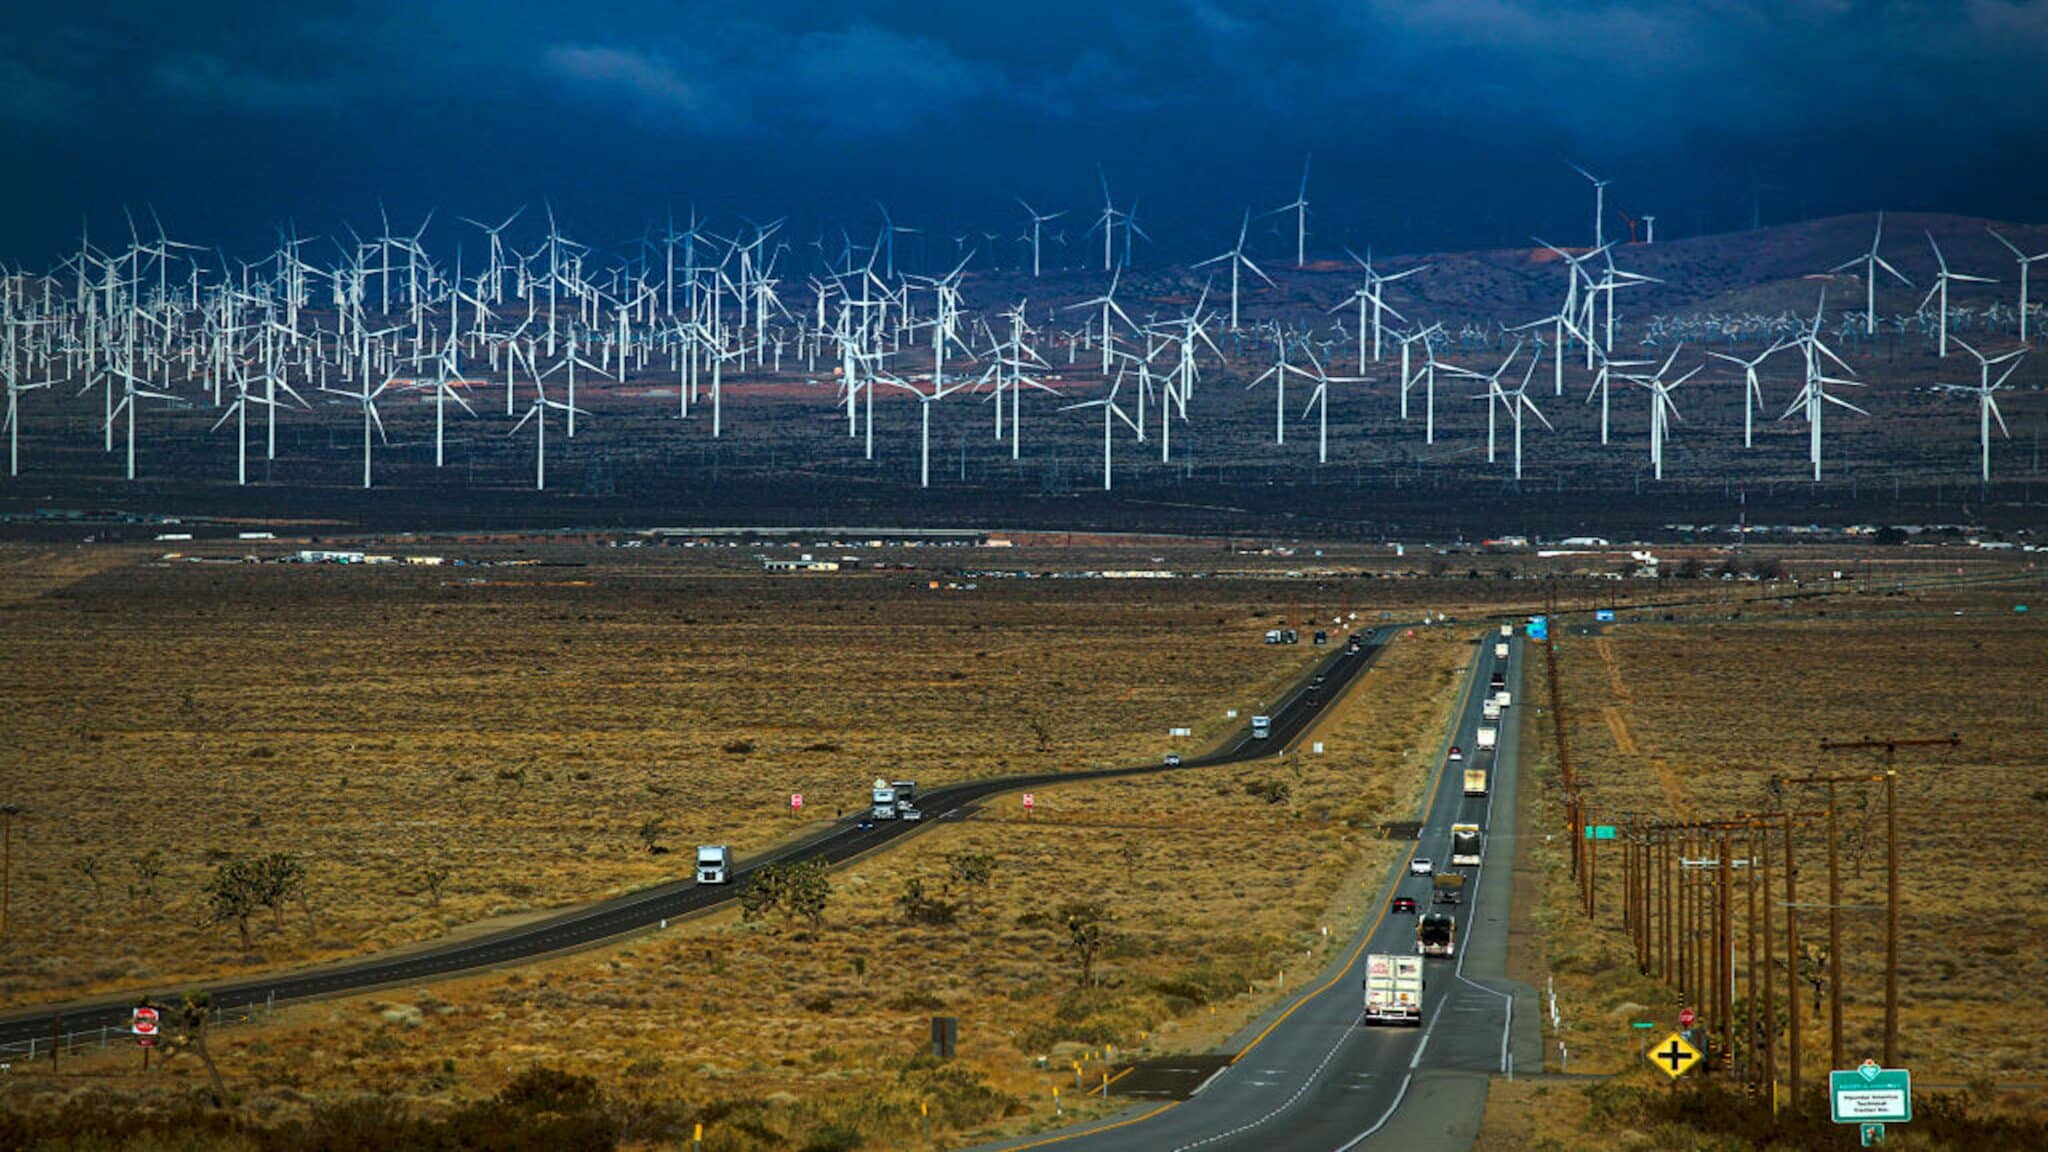 A view of wind turbines from Highway 58 in Mojave, California.